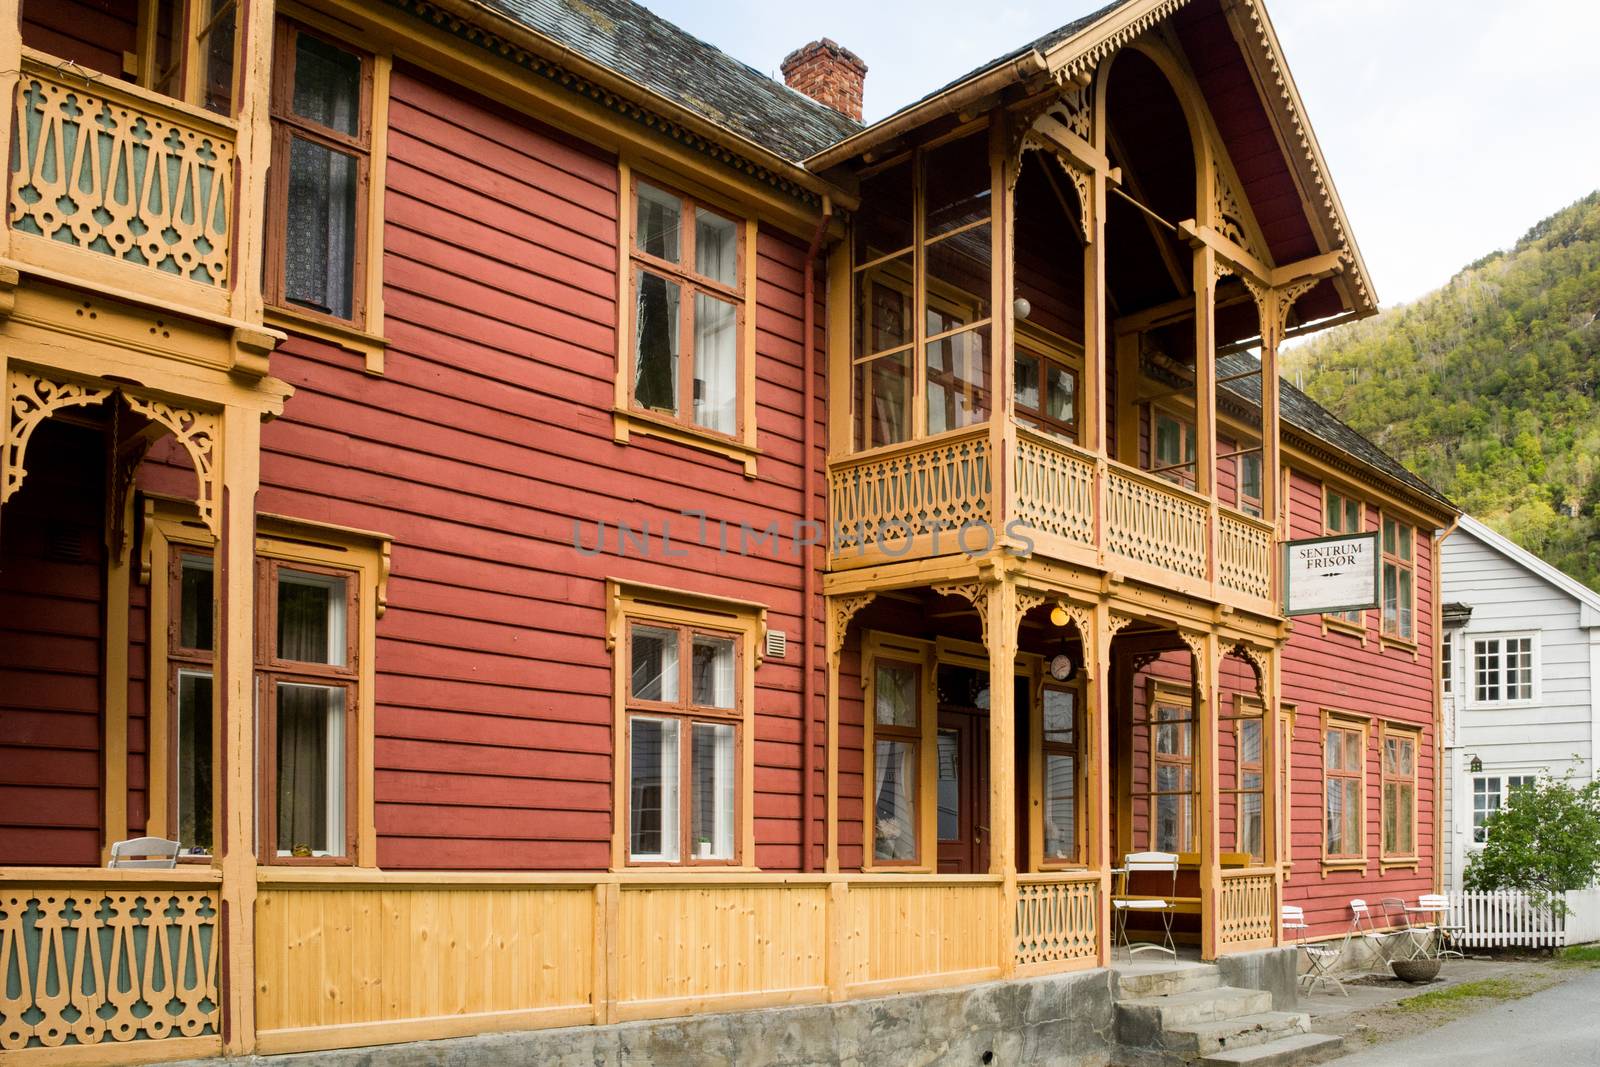 Laerdal, Sogn og Fjordane, Norway, May 2015: street scene with typical and historical houses of Laerdal or Laerdalsoyri in Norway